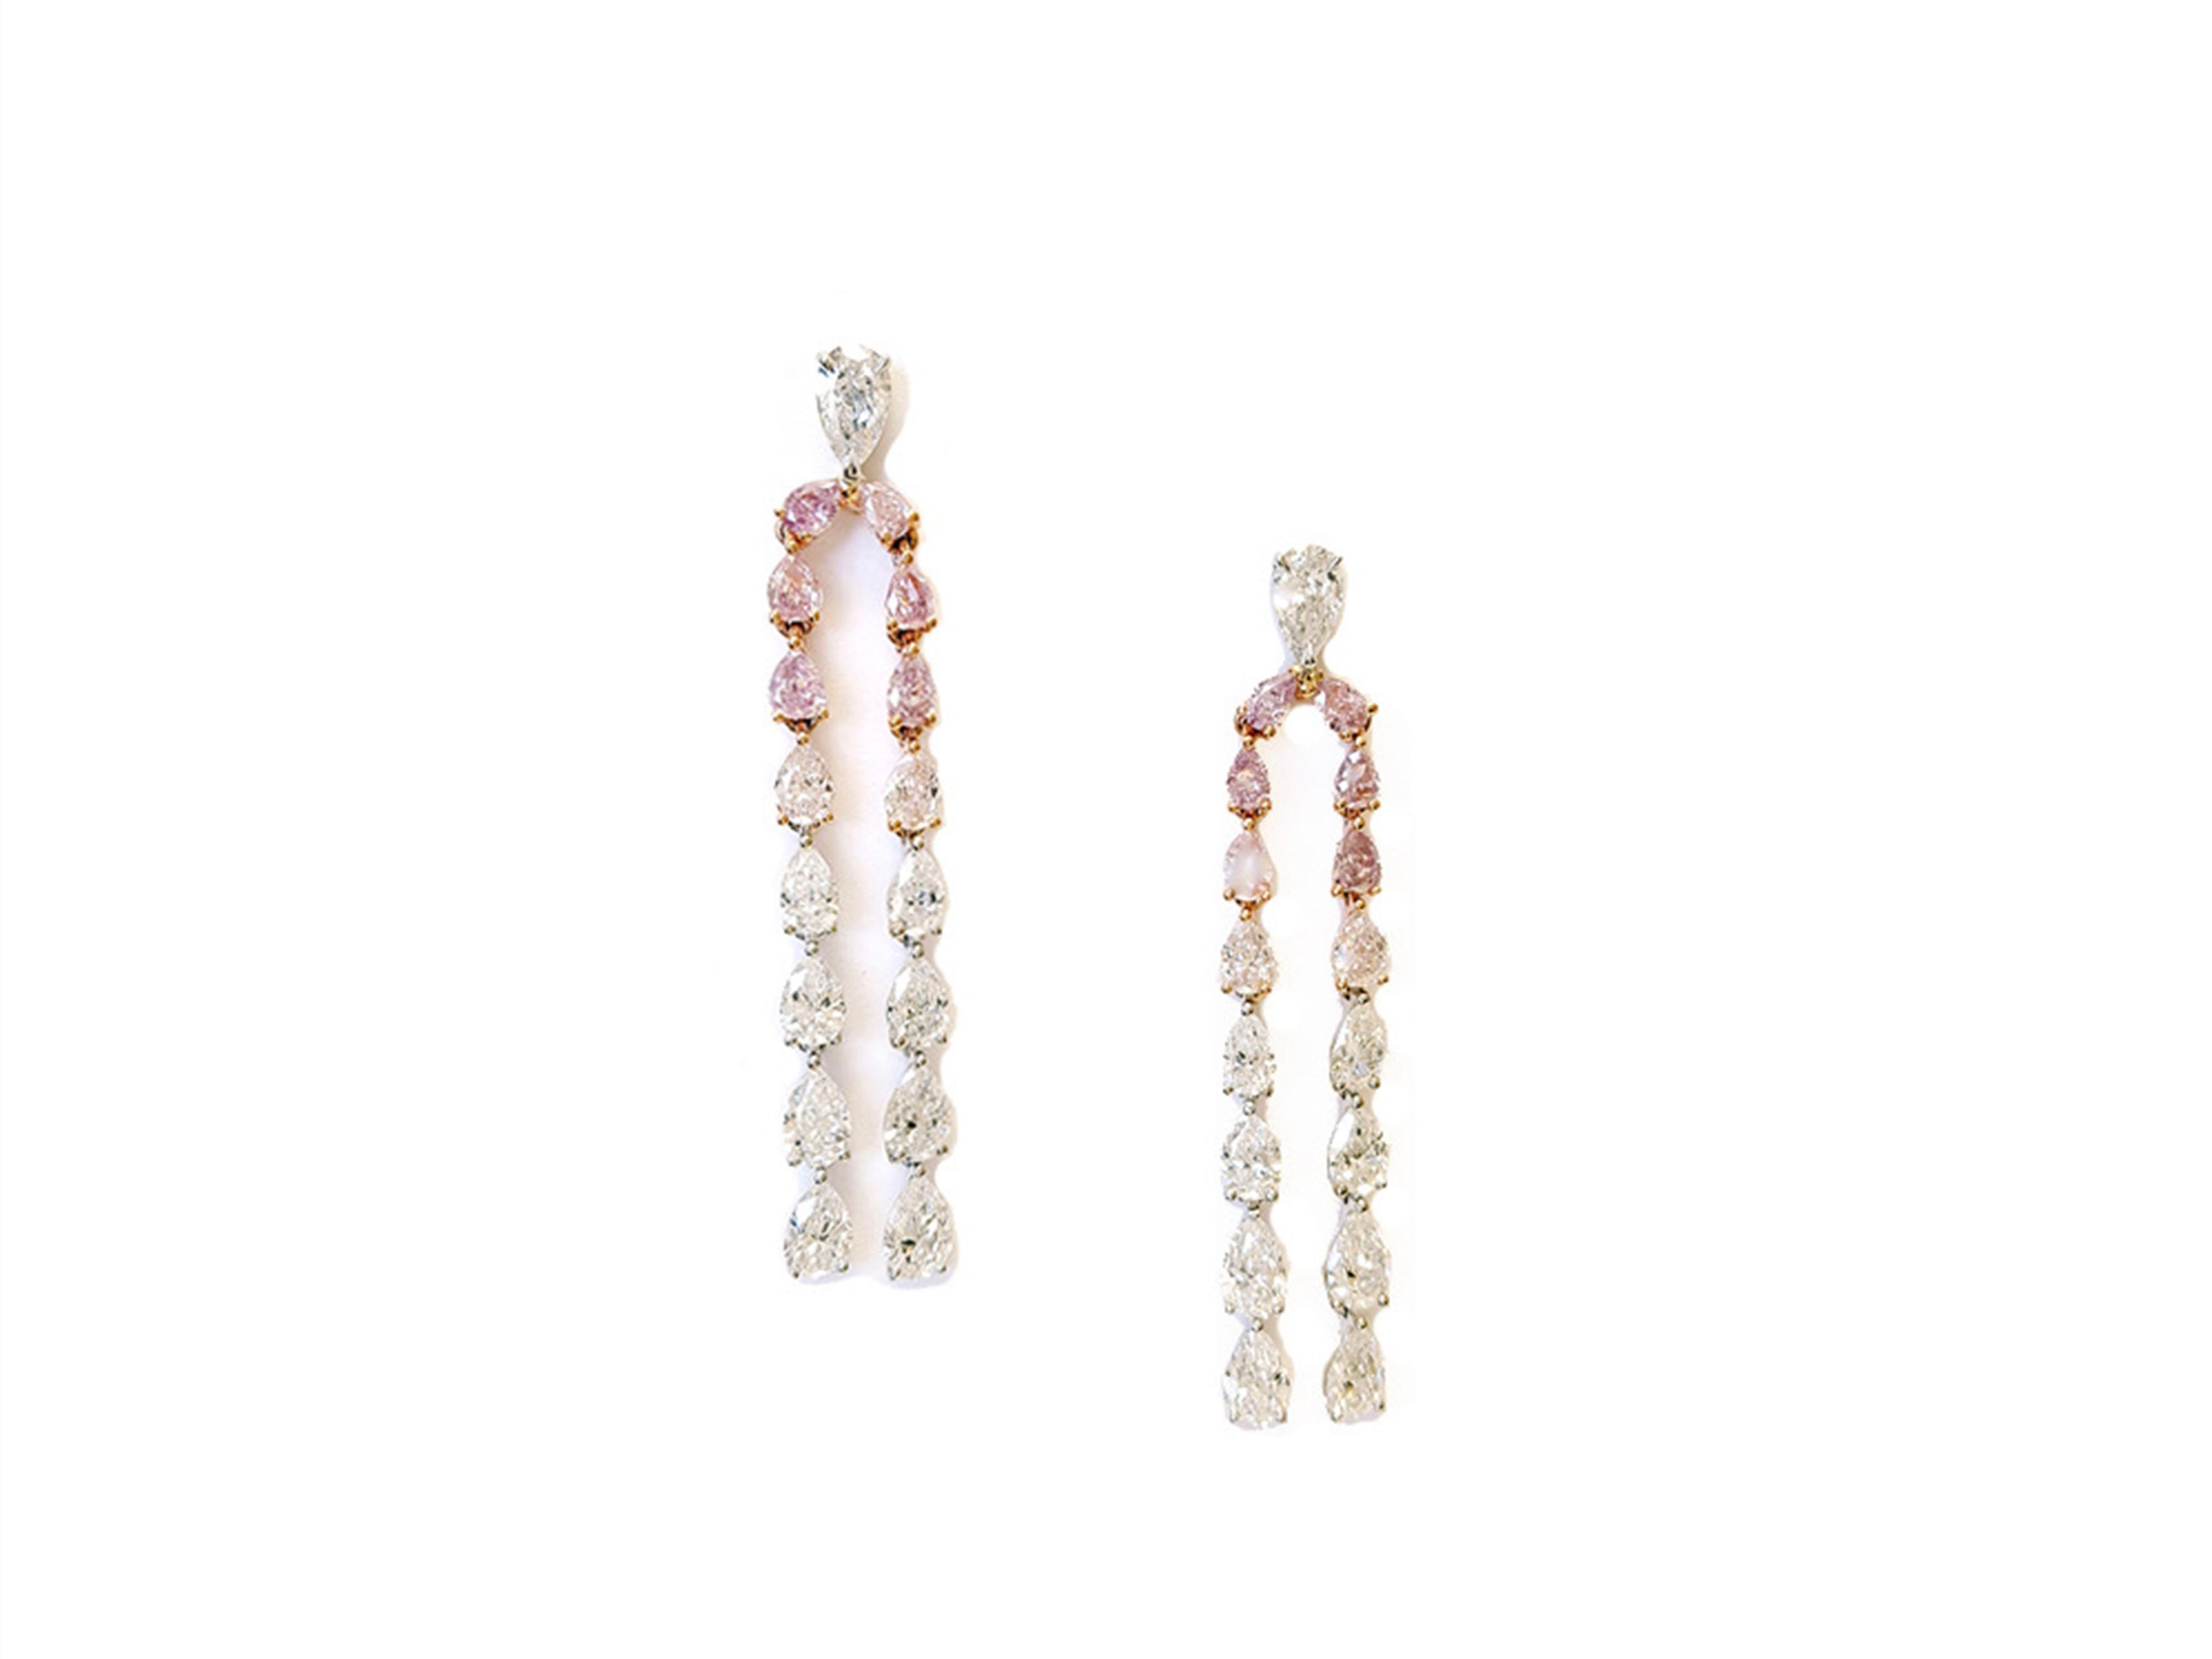 A stunning matched pair of 4.02 carat pear-shaped Pink and White Diamond 18k Rose Gold Tassel Drop Earrings.
These elegant and unique tassel drop earrings showcase 1.75 carat pear-shaped pink diamonds and 2.27 pear-shaped white diamonds VS